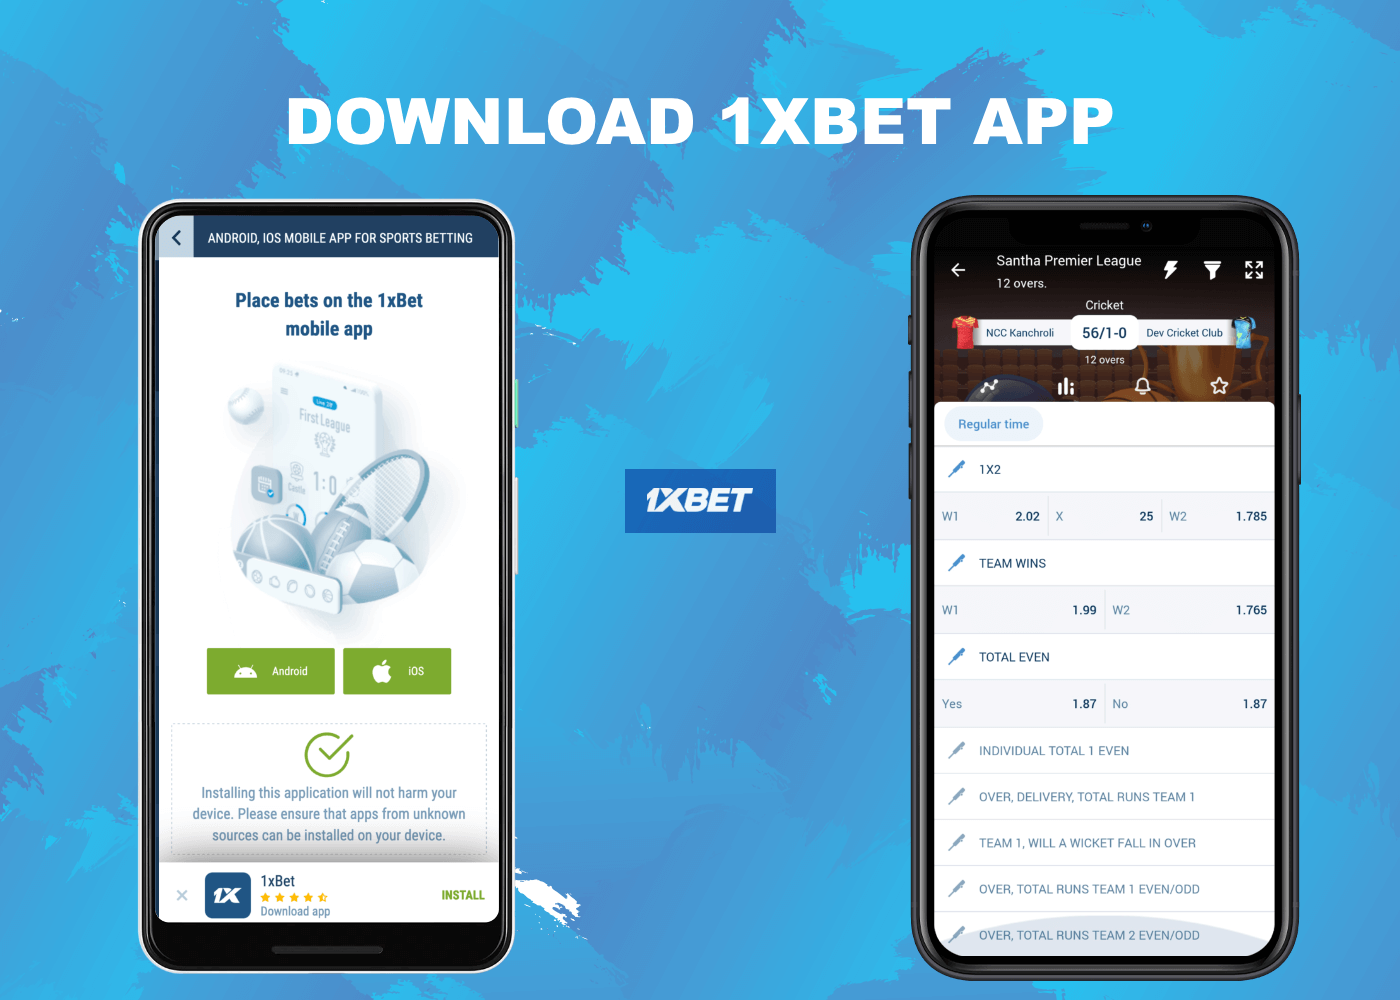 1xbet mobile app for iPhone and Android devices